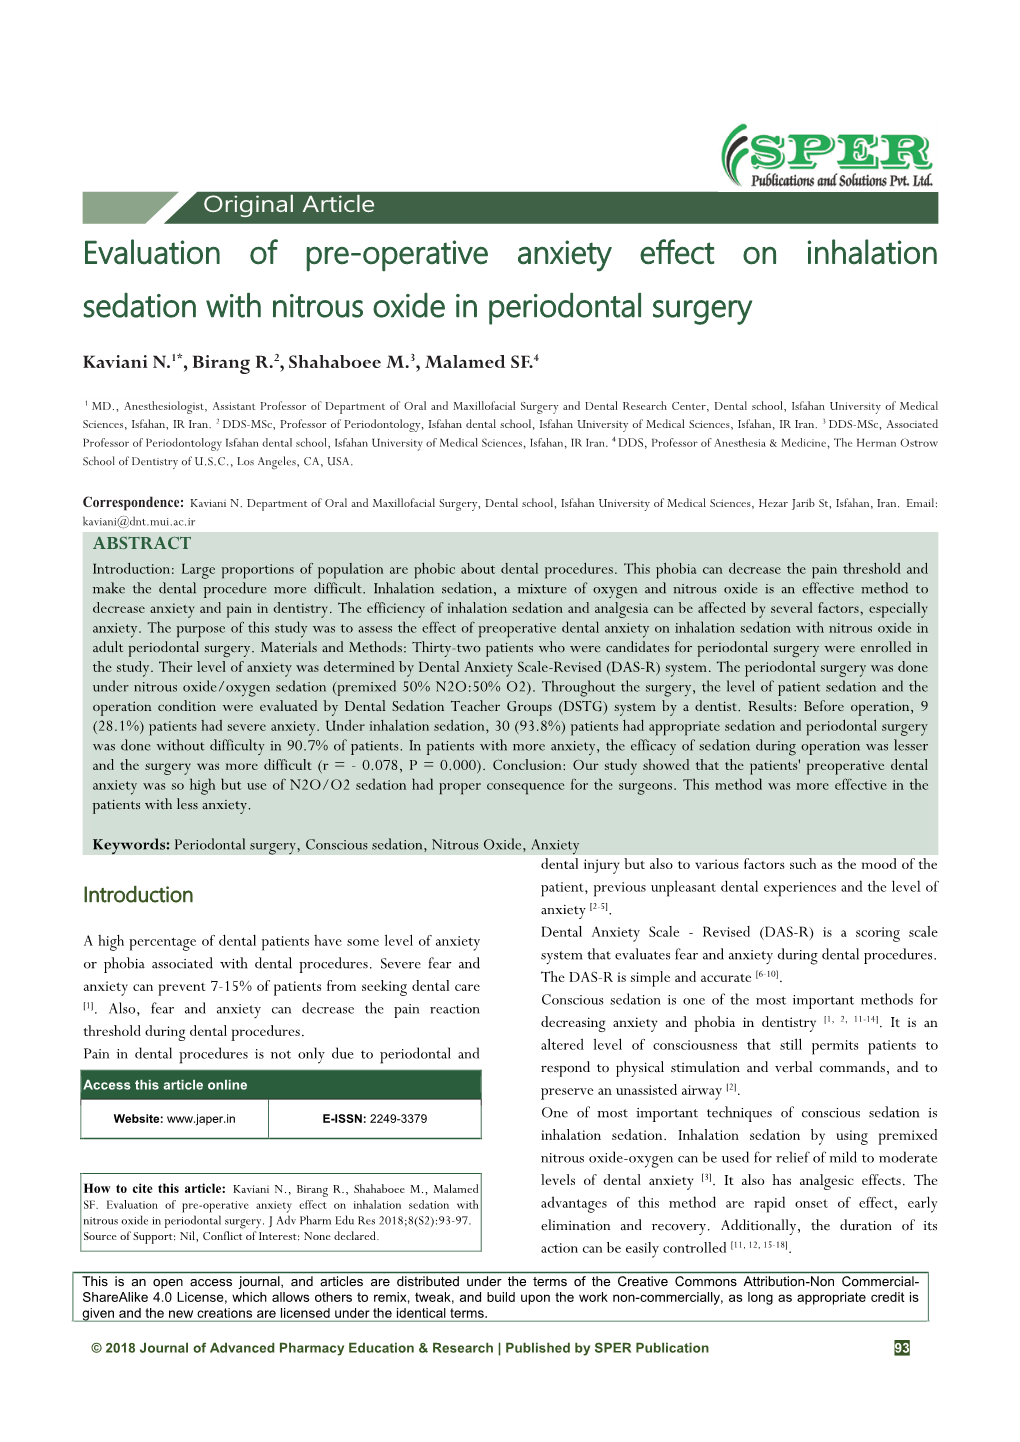 Evaluation of Pre-Operative Anxiety Effect on Inhalation Sedation with Nitrous Oxide in Periodontal Surgery